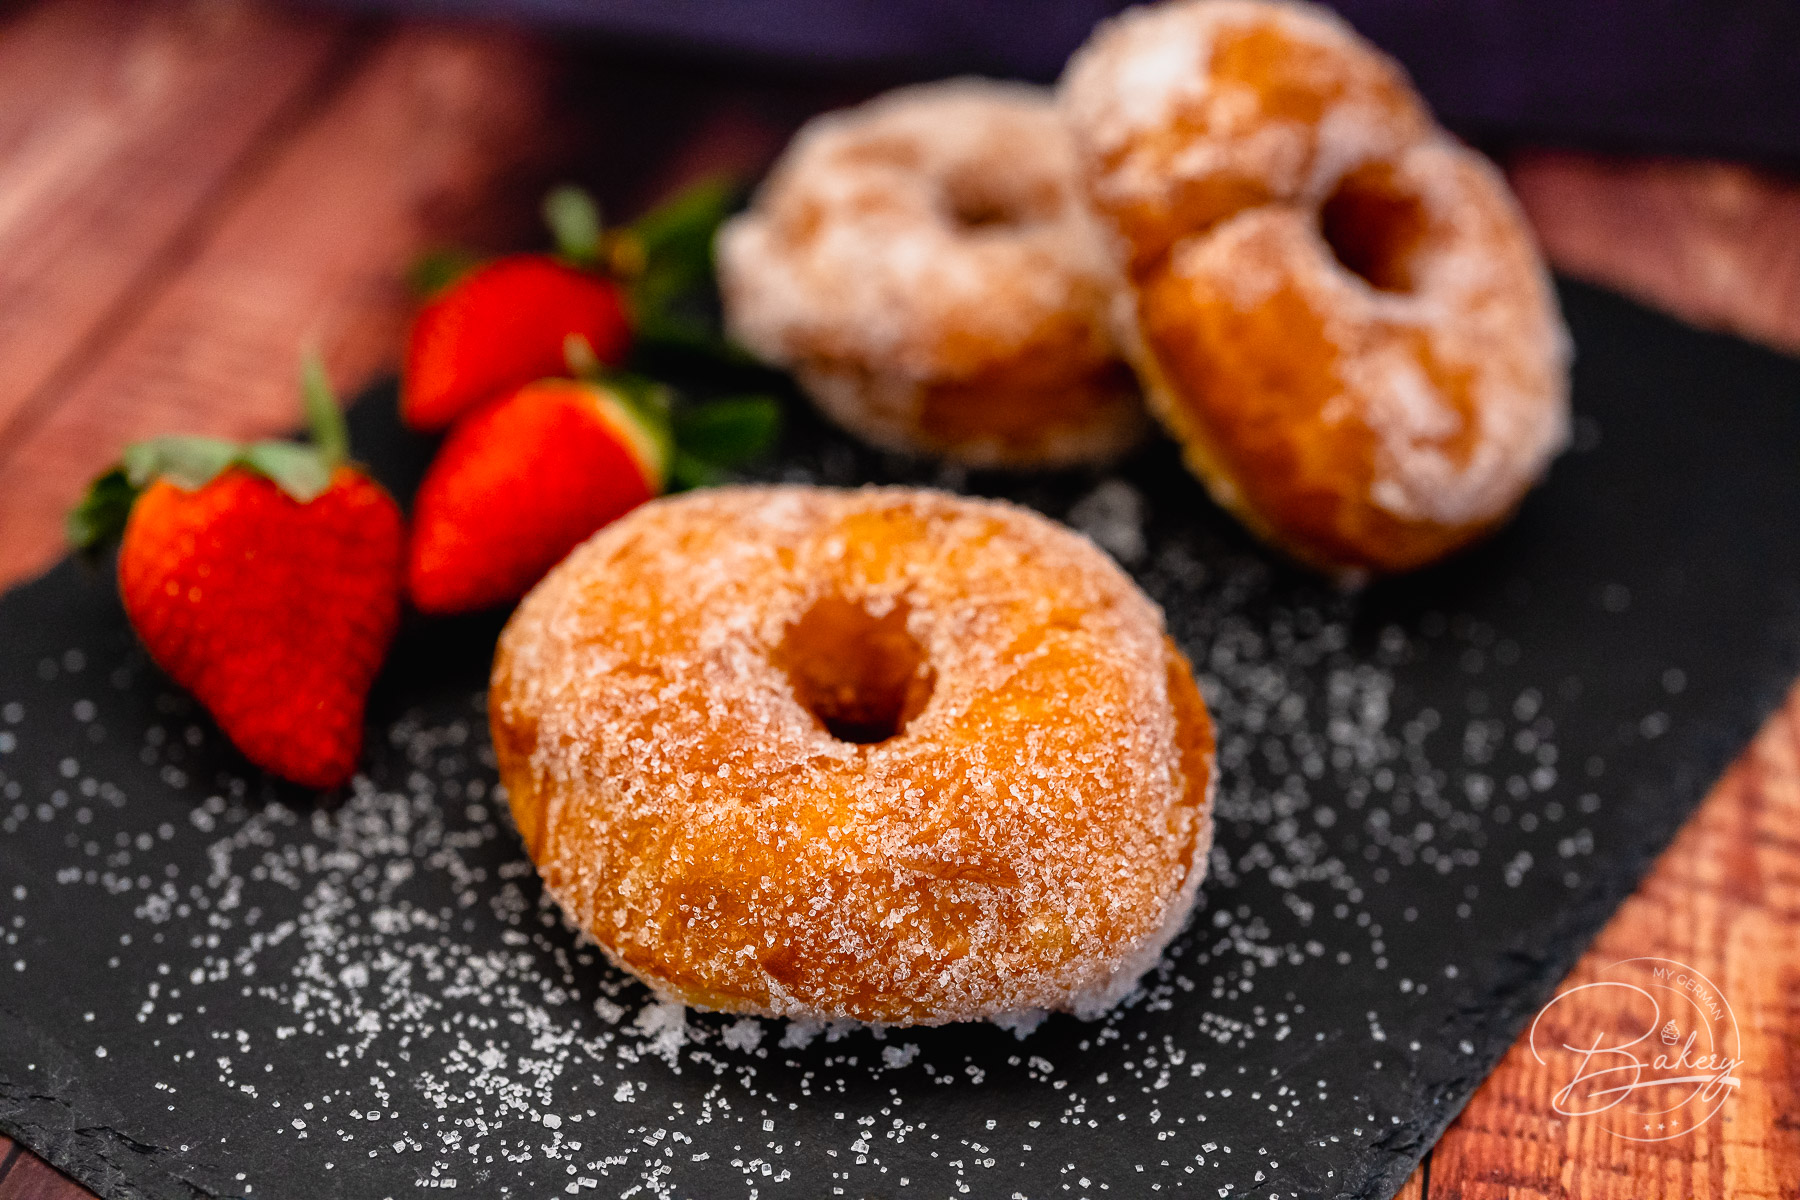 Donuts recipe - delicious, fluffy, easy and quick homemade - Make your own donuts - simple donuts recipe and Berlin variant with yeast dough baked in a pan. Delicious donuts cake rings with sugar, powdered sugar, chocolate.